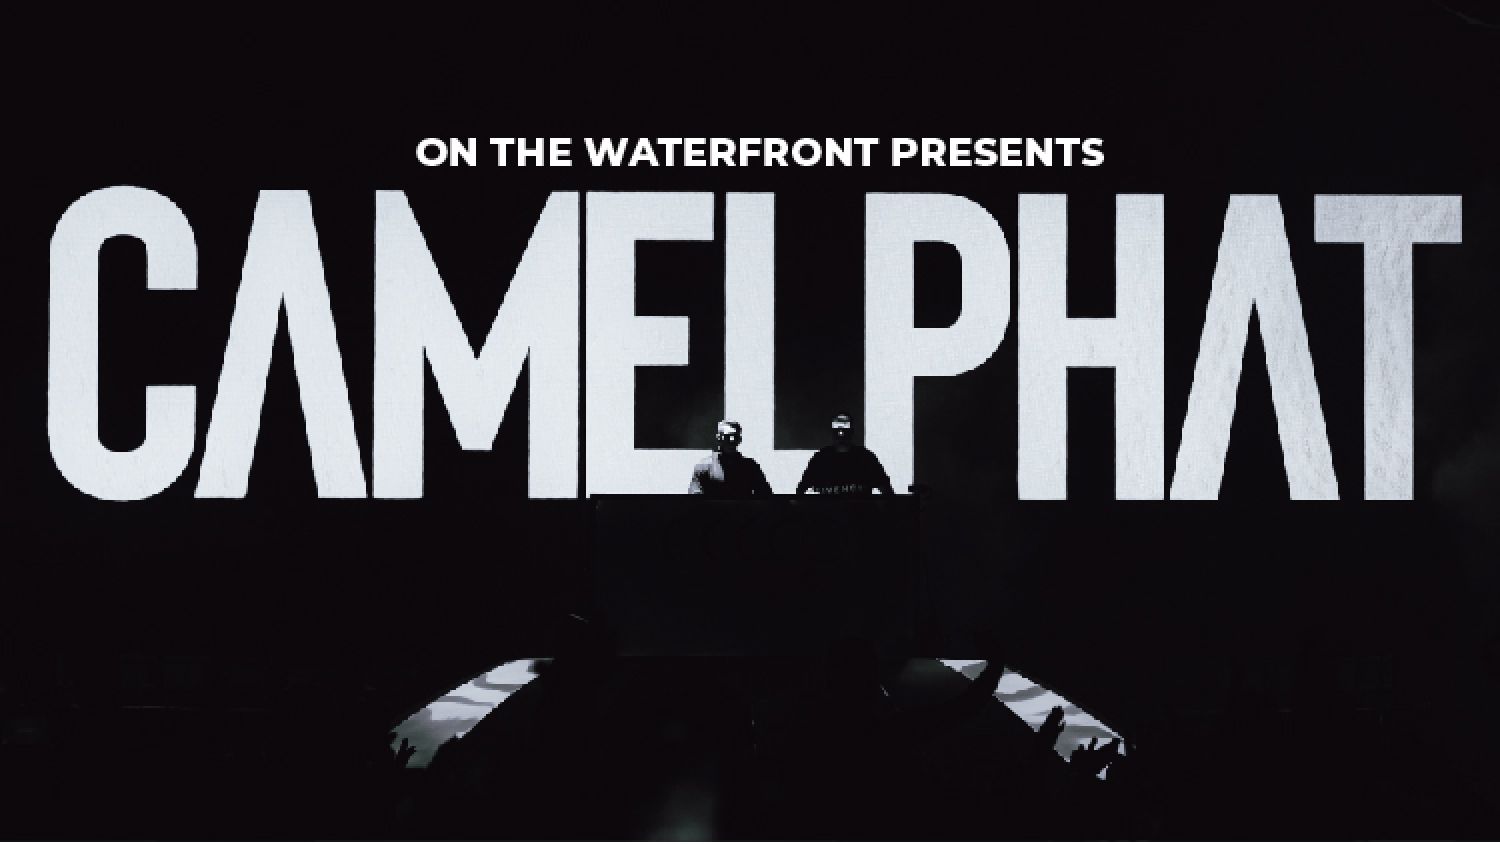 On the Waterfront - Camelphat